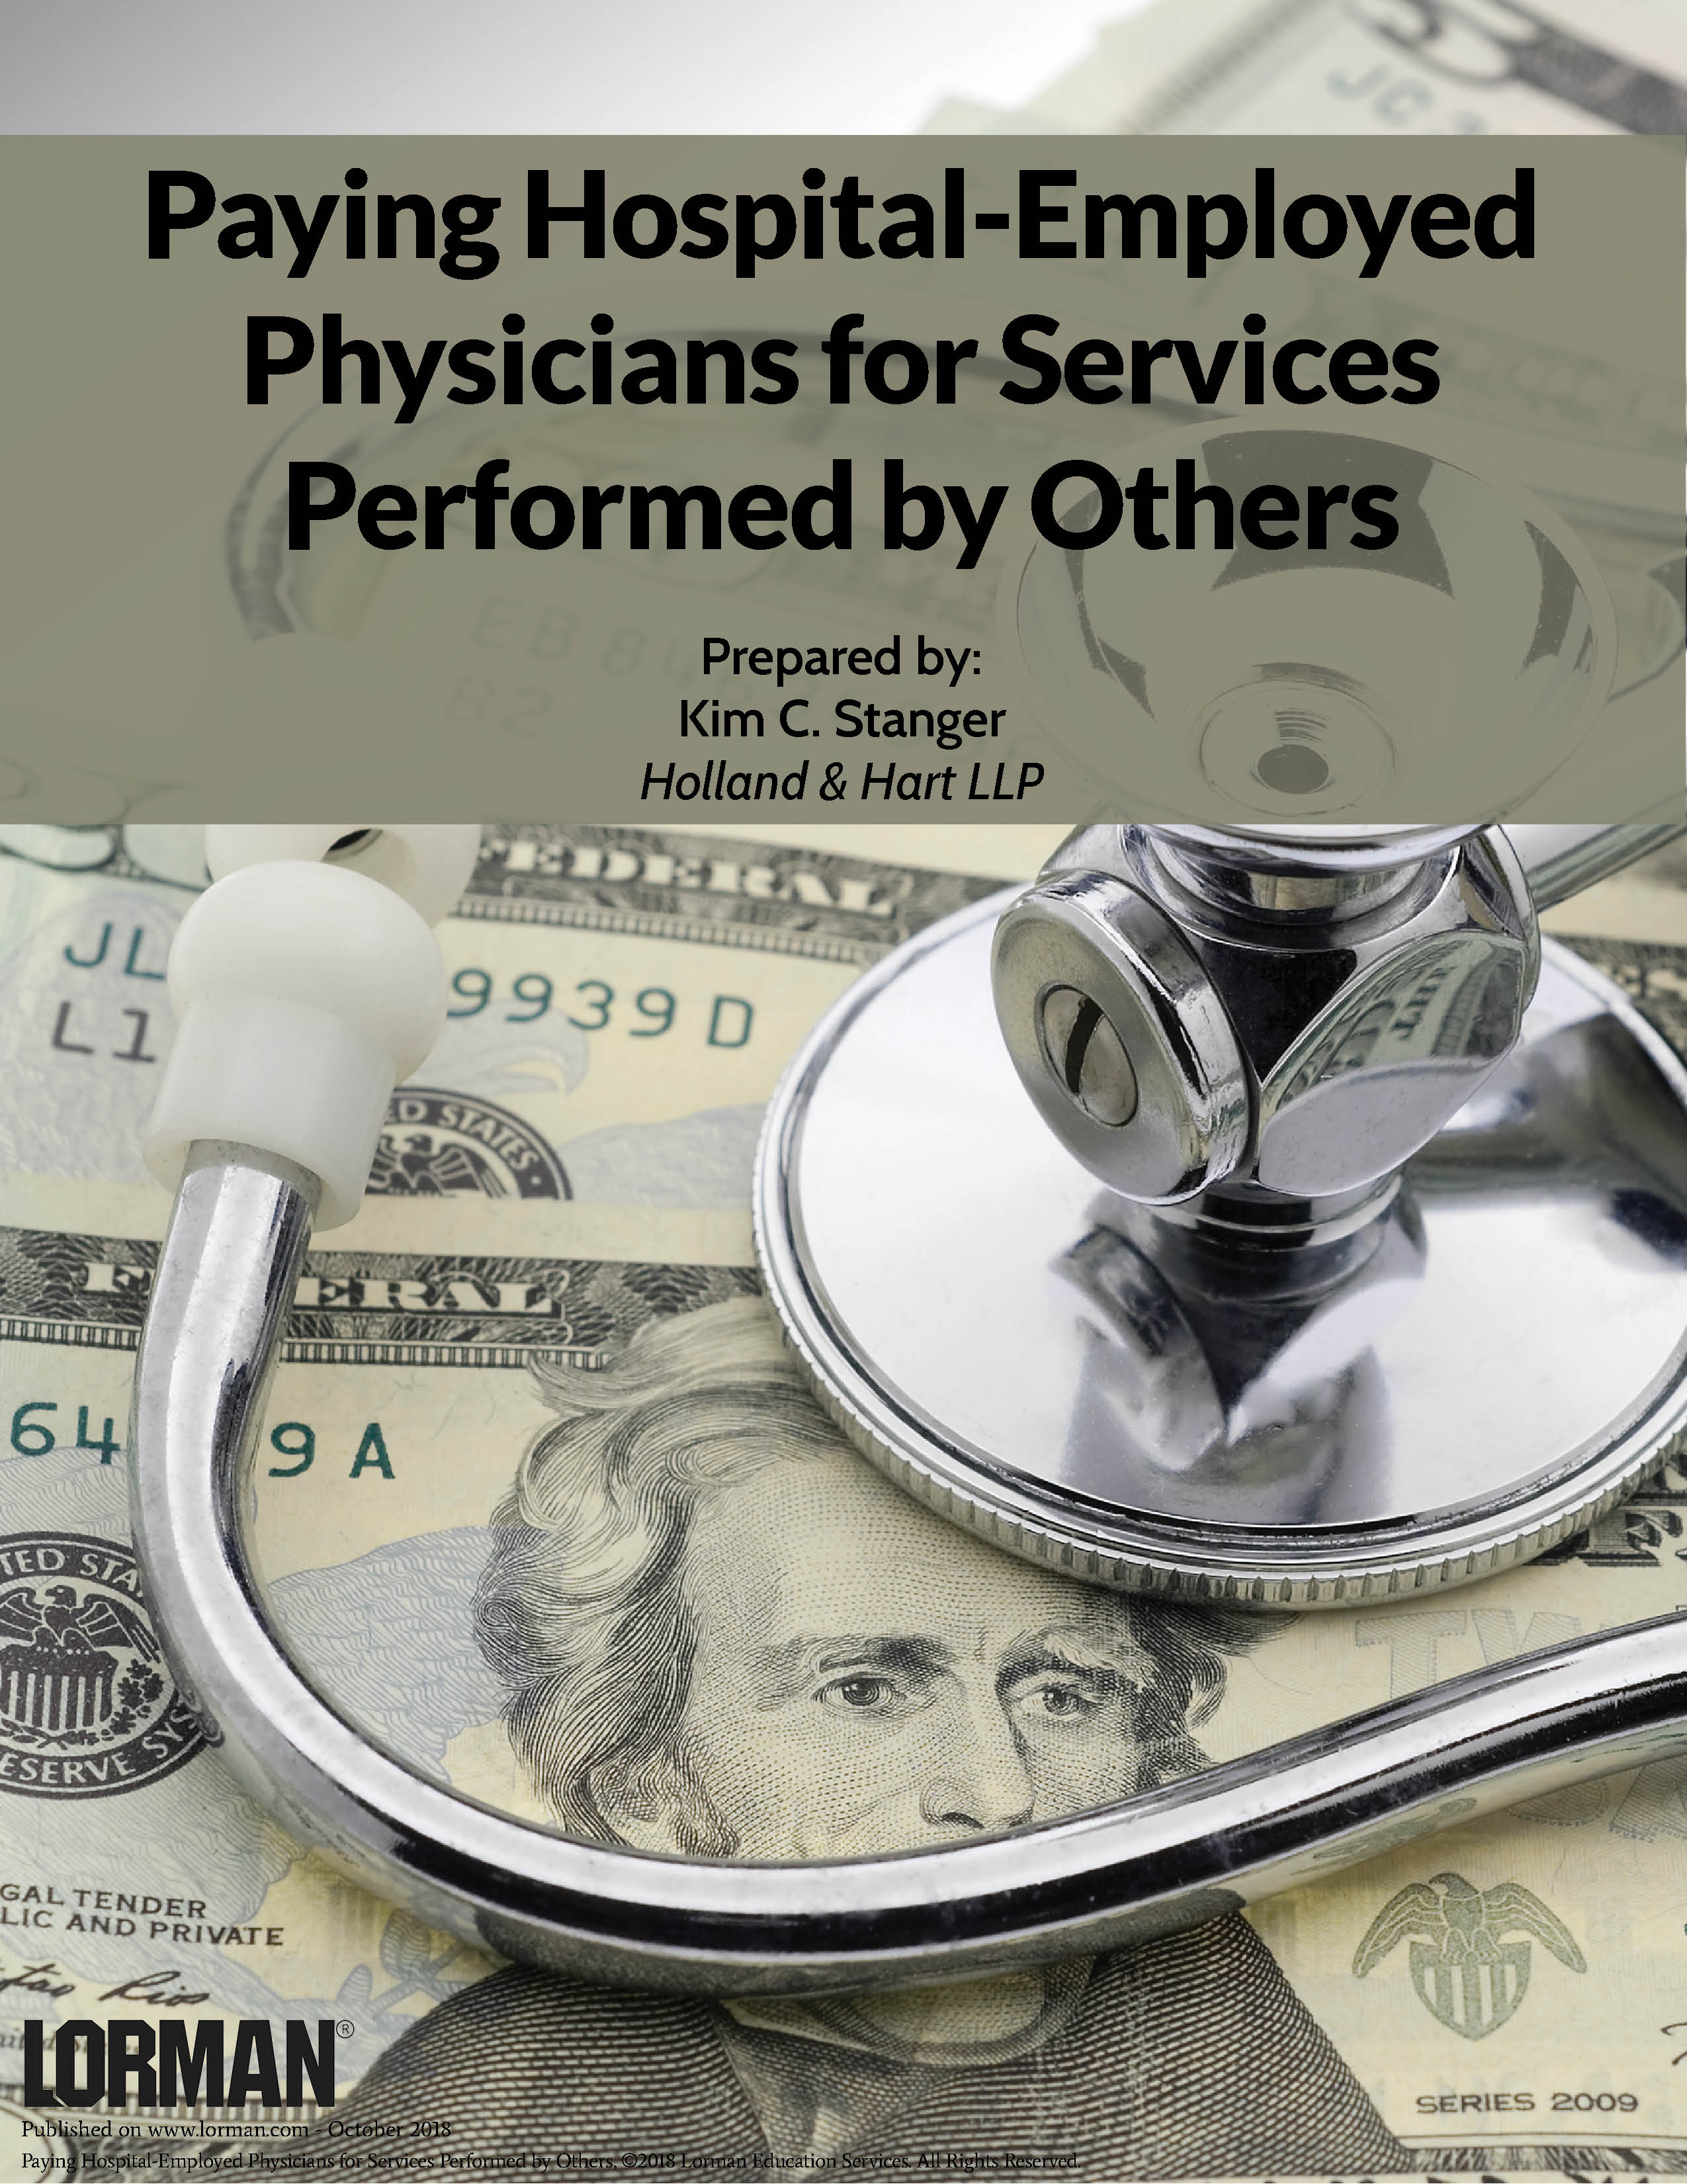 Paying Hospital-Employed Physicians for Services Performed by Others